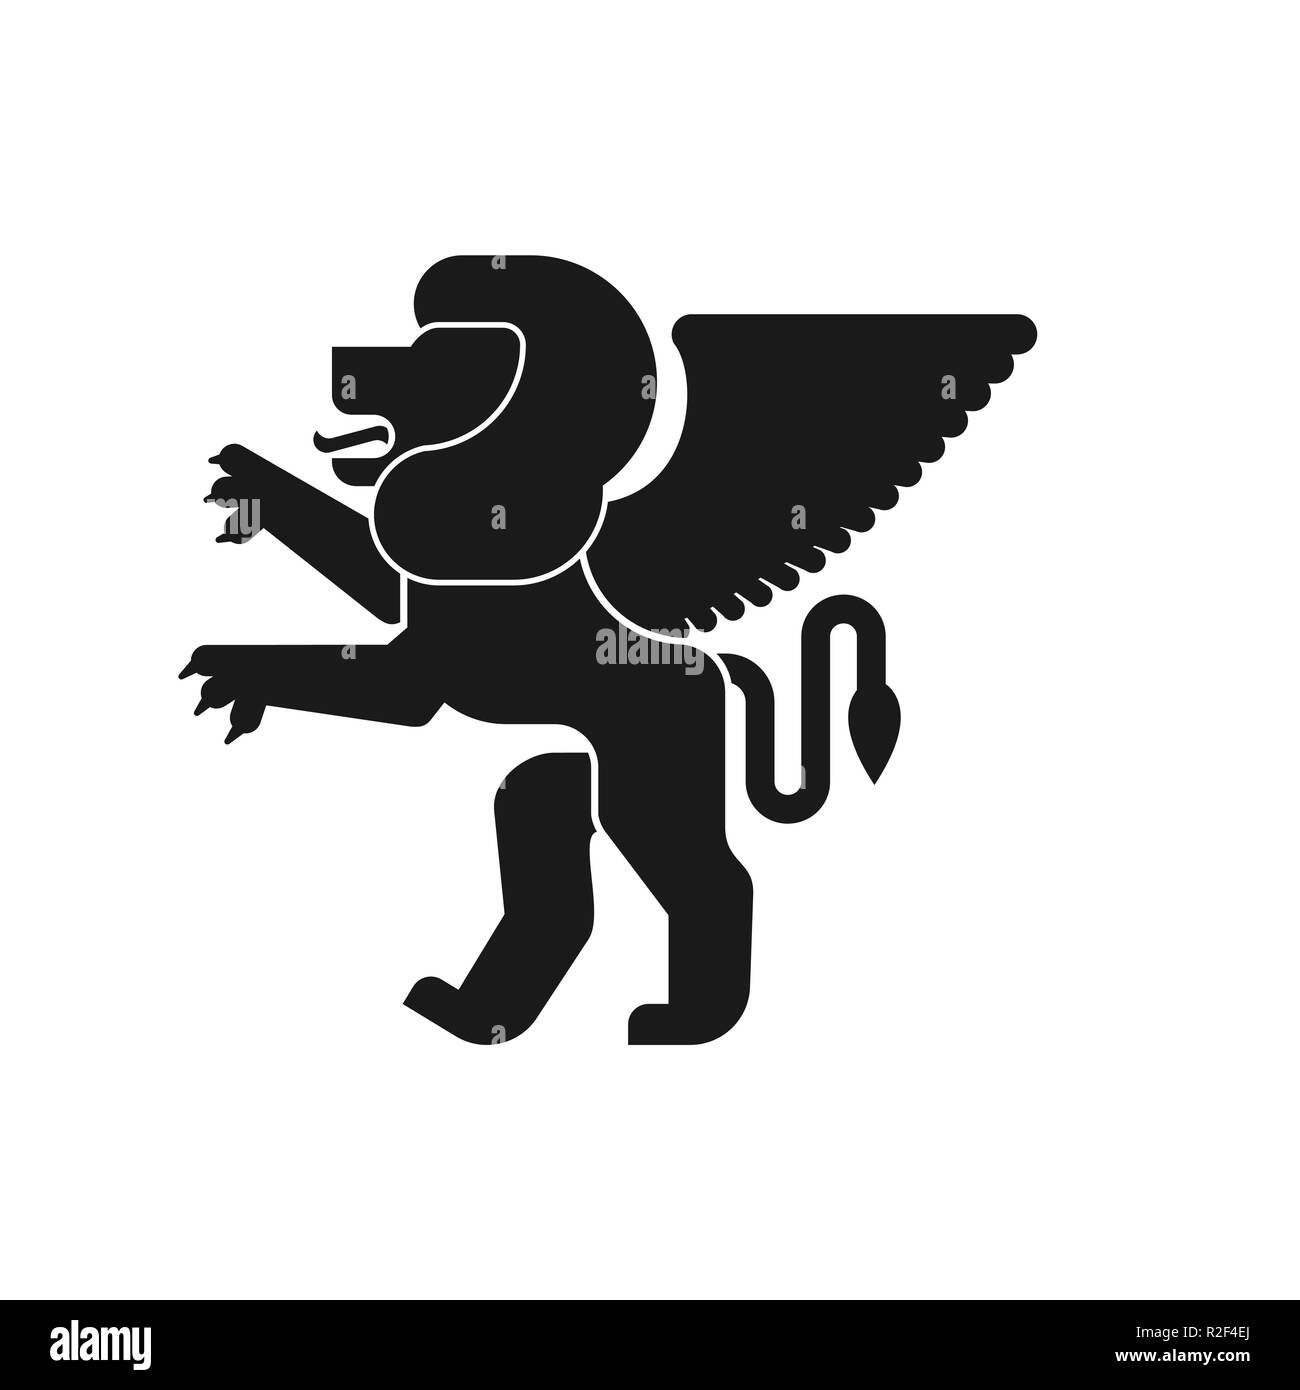 Winged lion Heraldic animal silhouette. Leo with wings. Fantastic Beast. Monster for coat of arms. Heraldry design element. Stock Vector